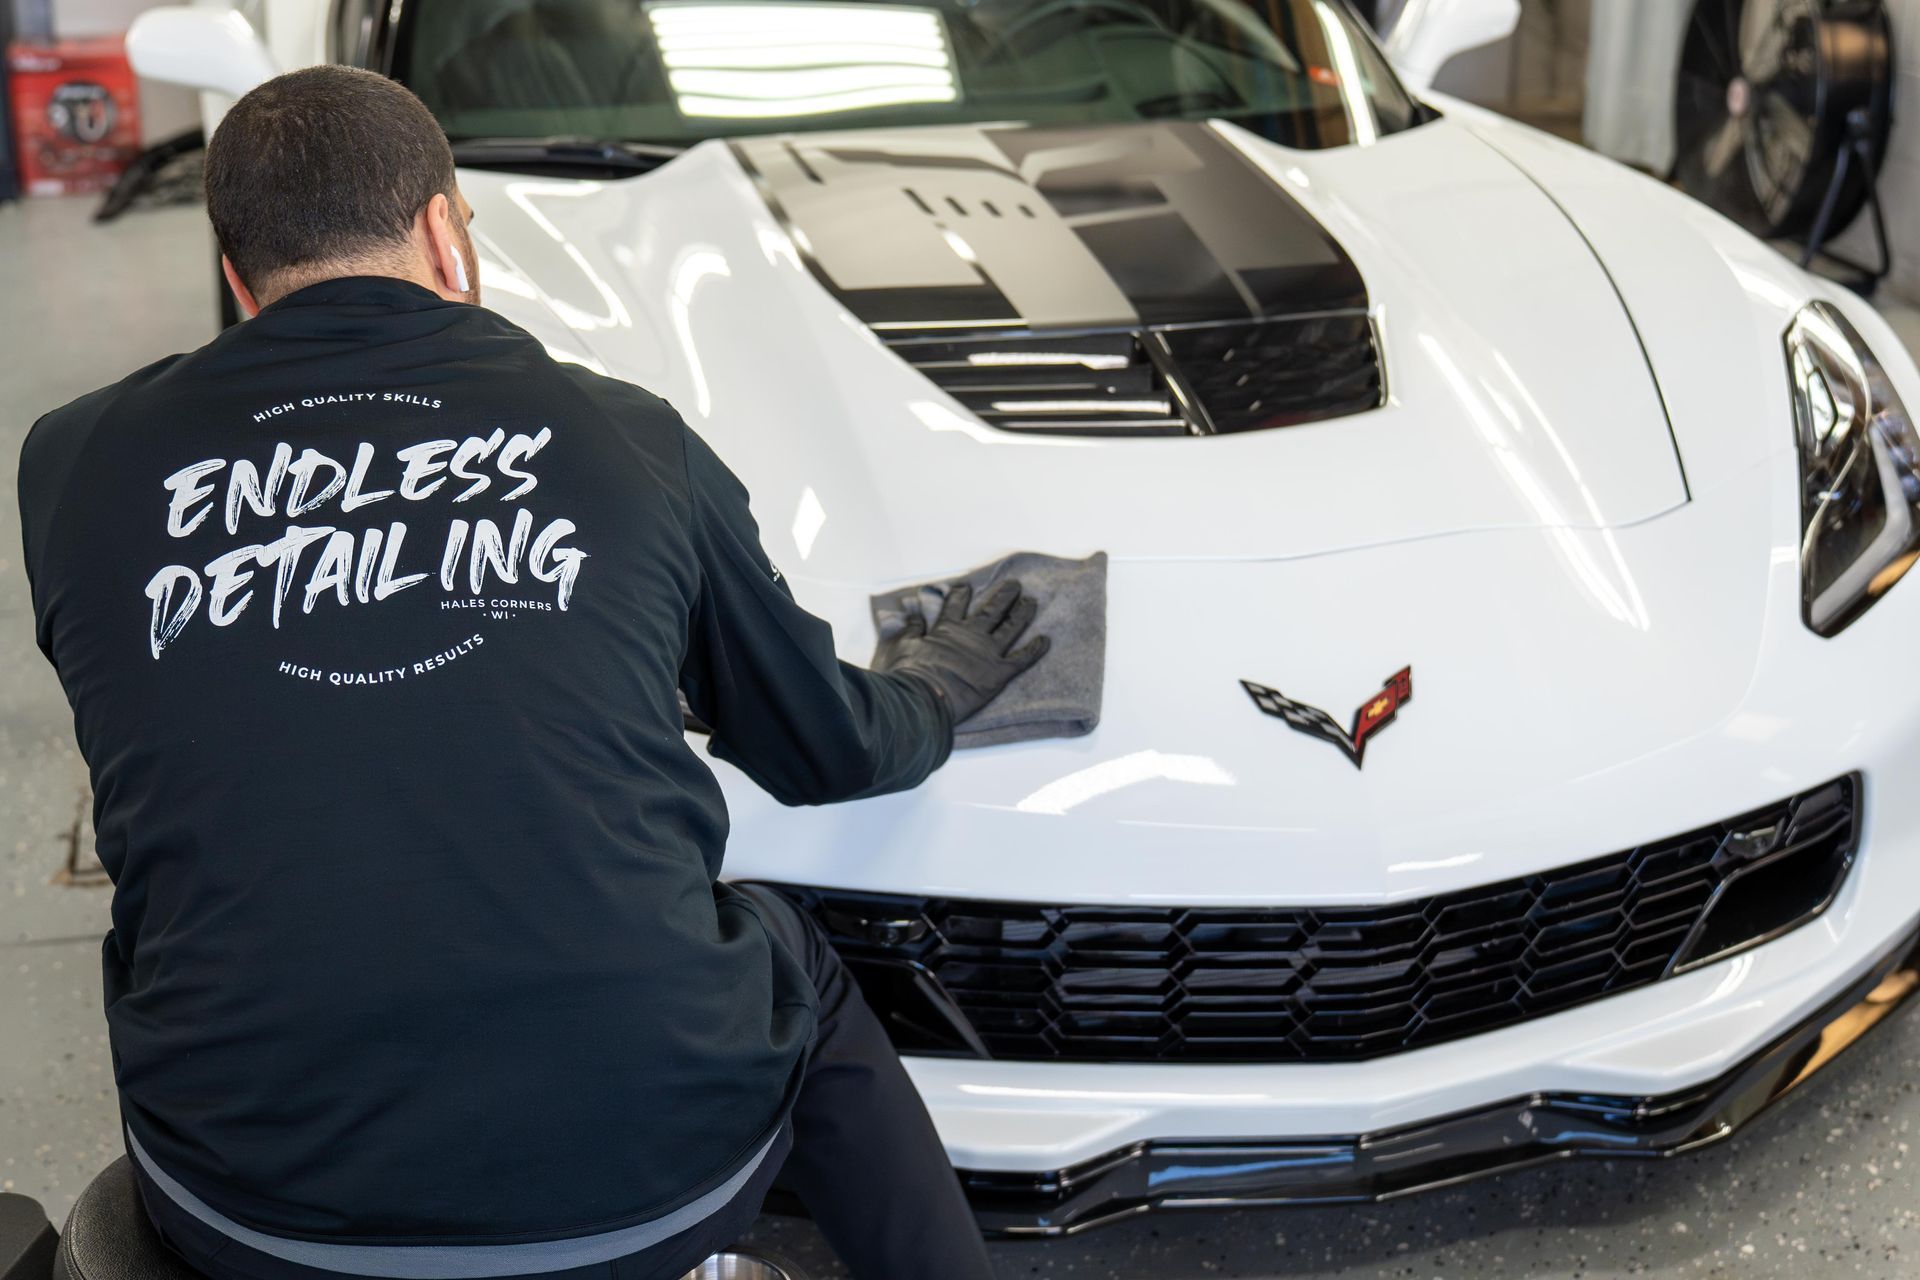 Exterior Detailing - A man is cleaning a white car with a cloth .